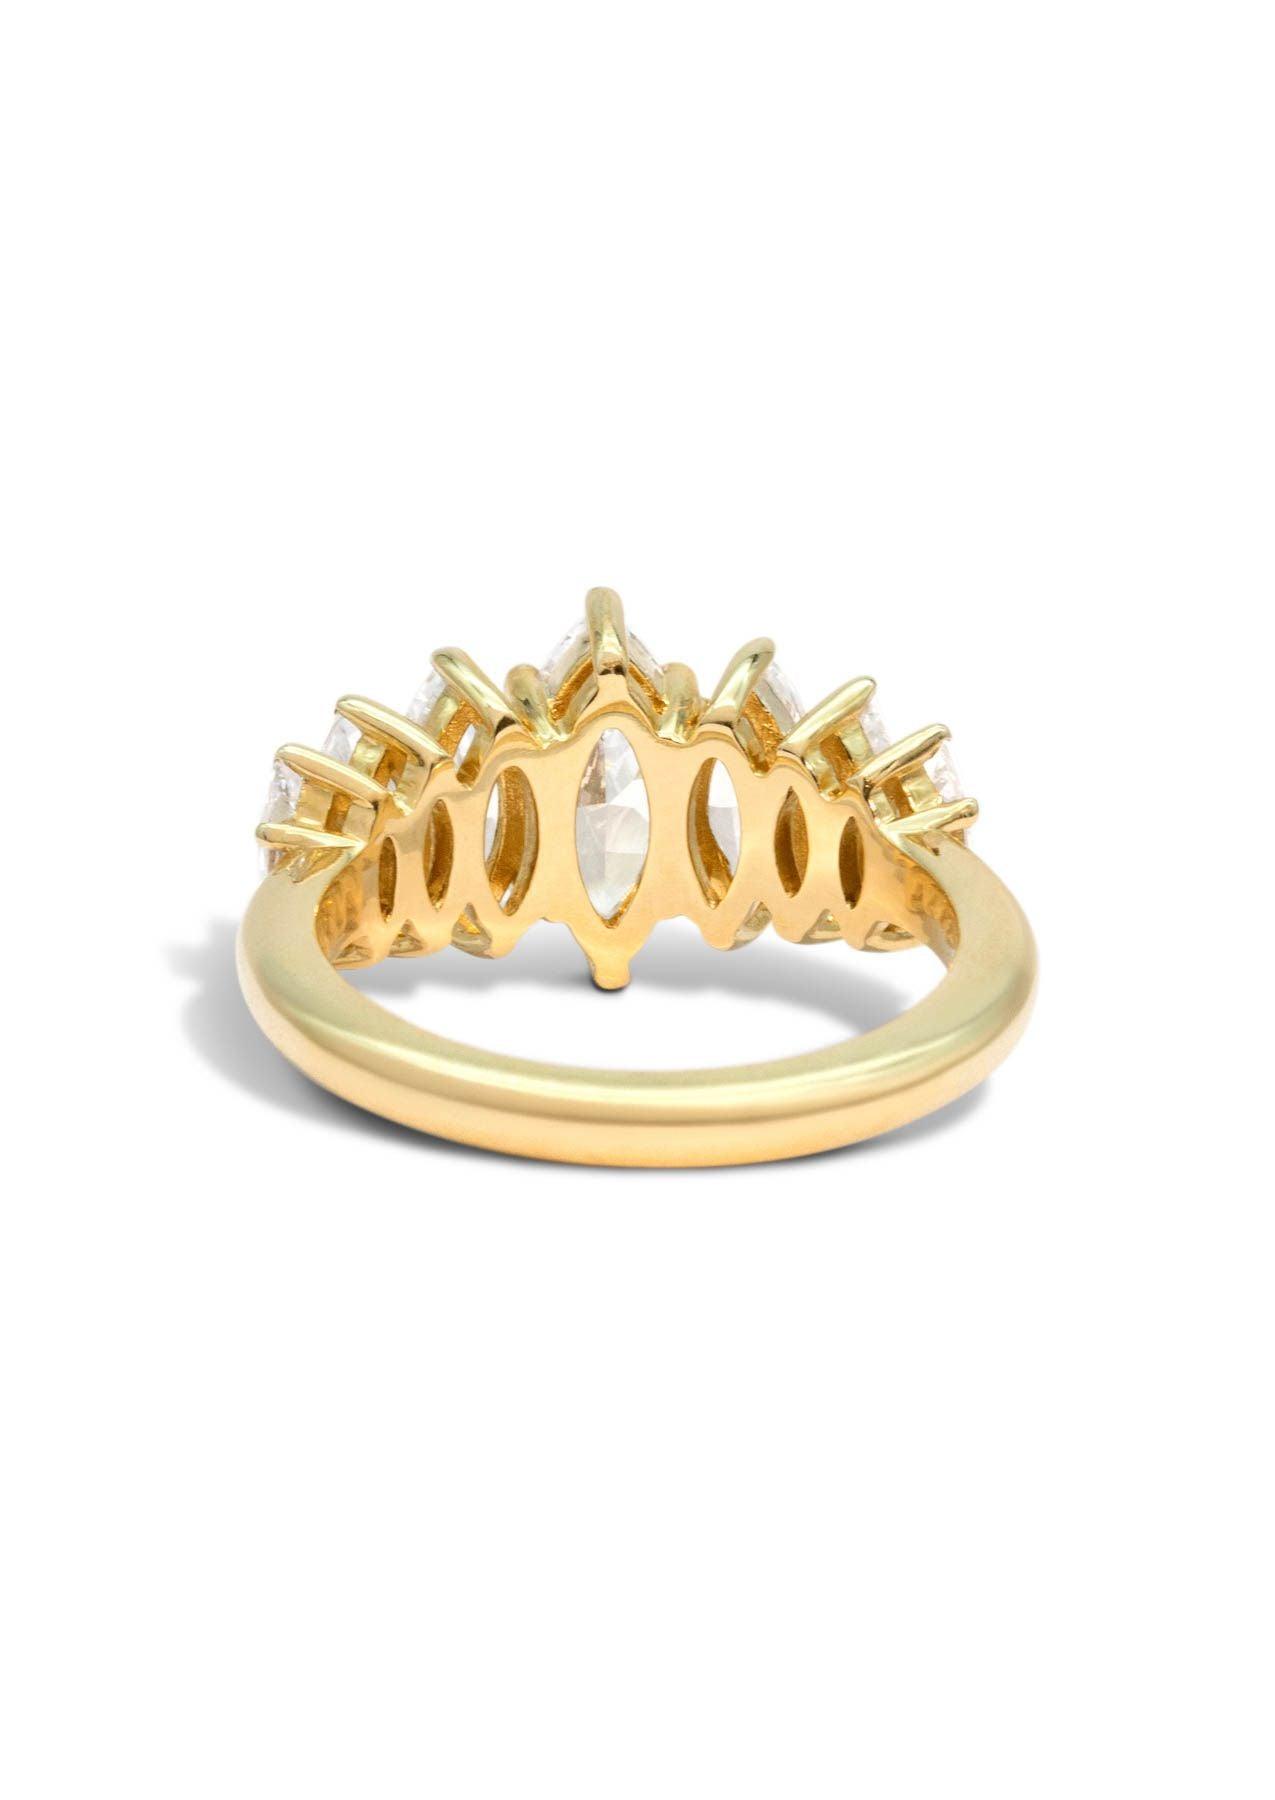 The Marquise Banks Yellow Gold Cultured Diamond Ring